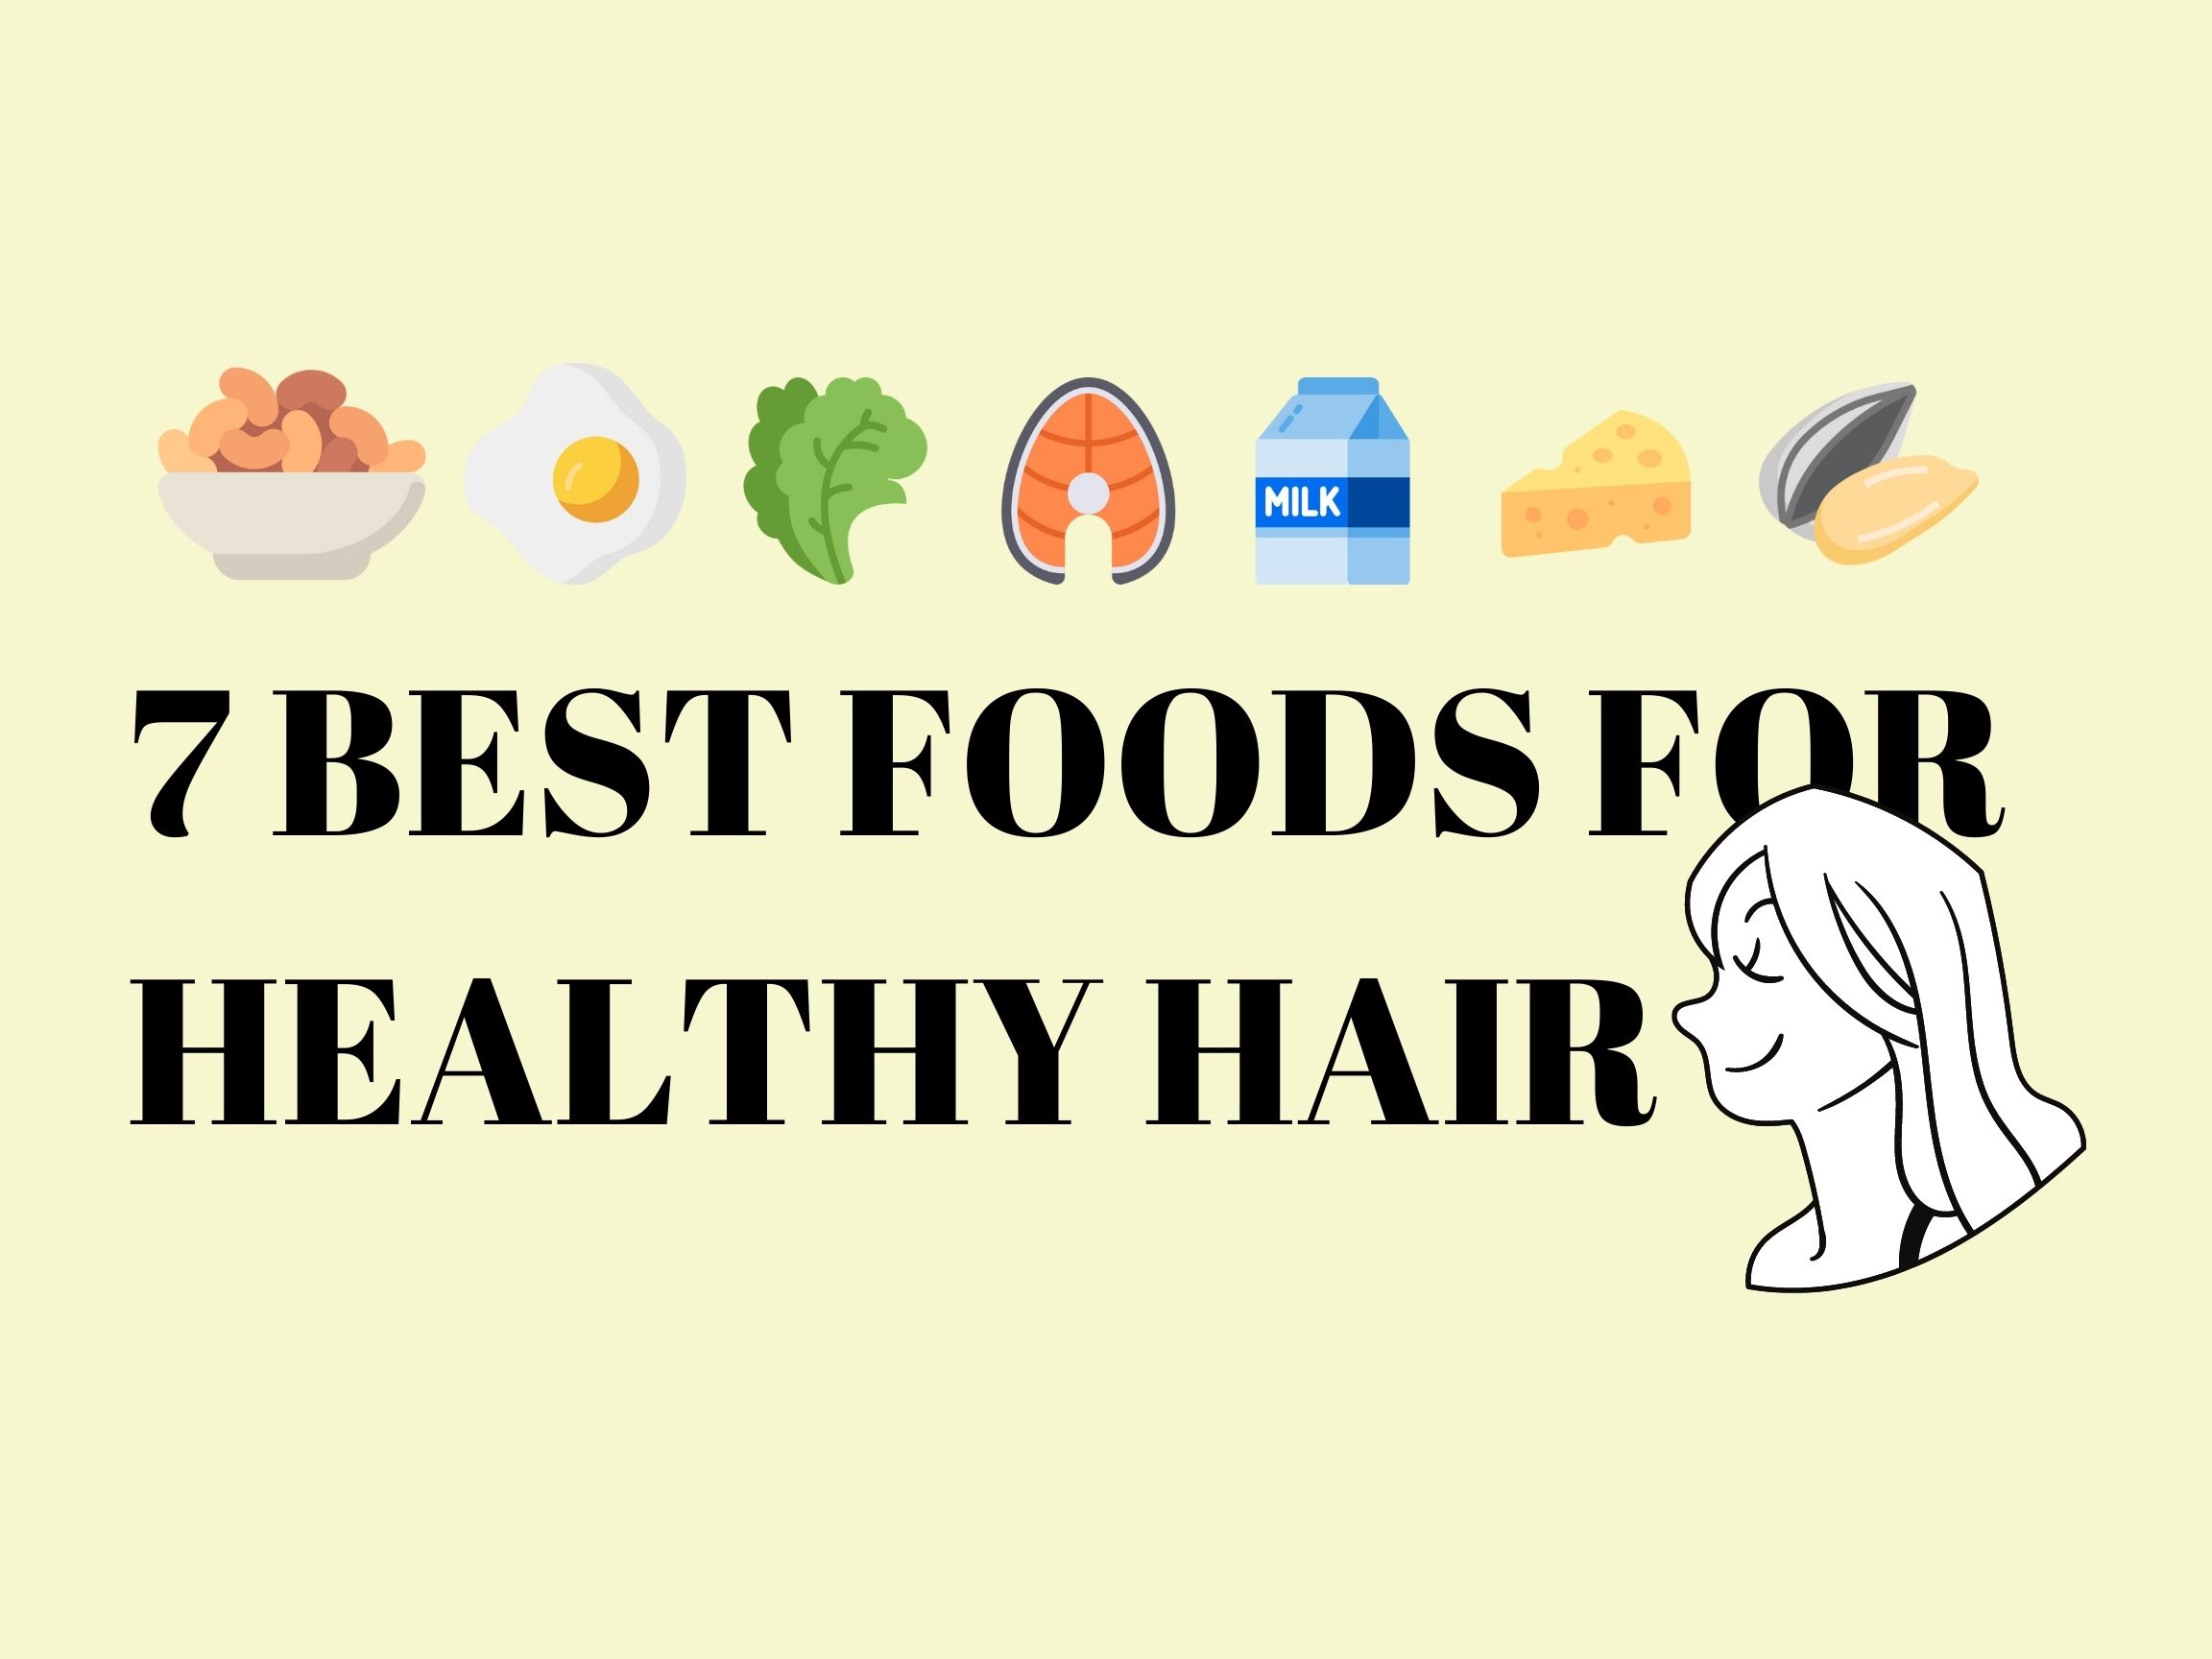 Top 7 foods for healthy hair